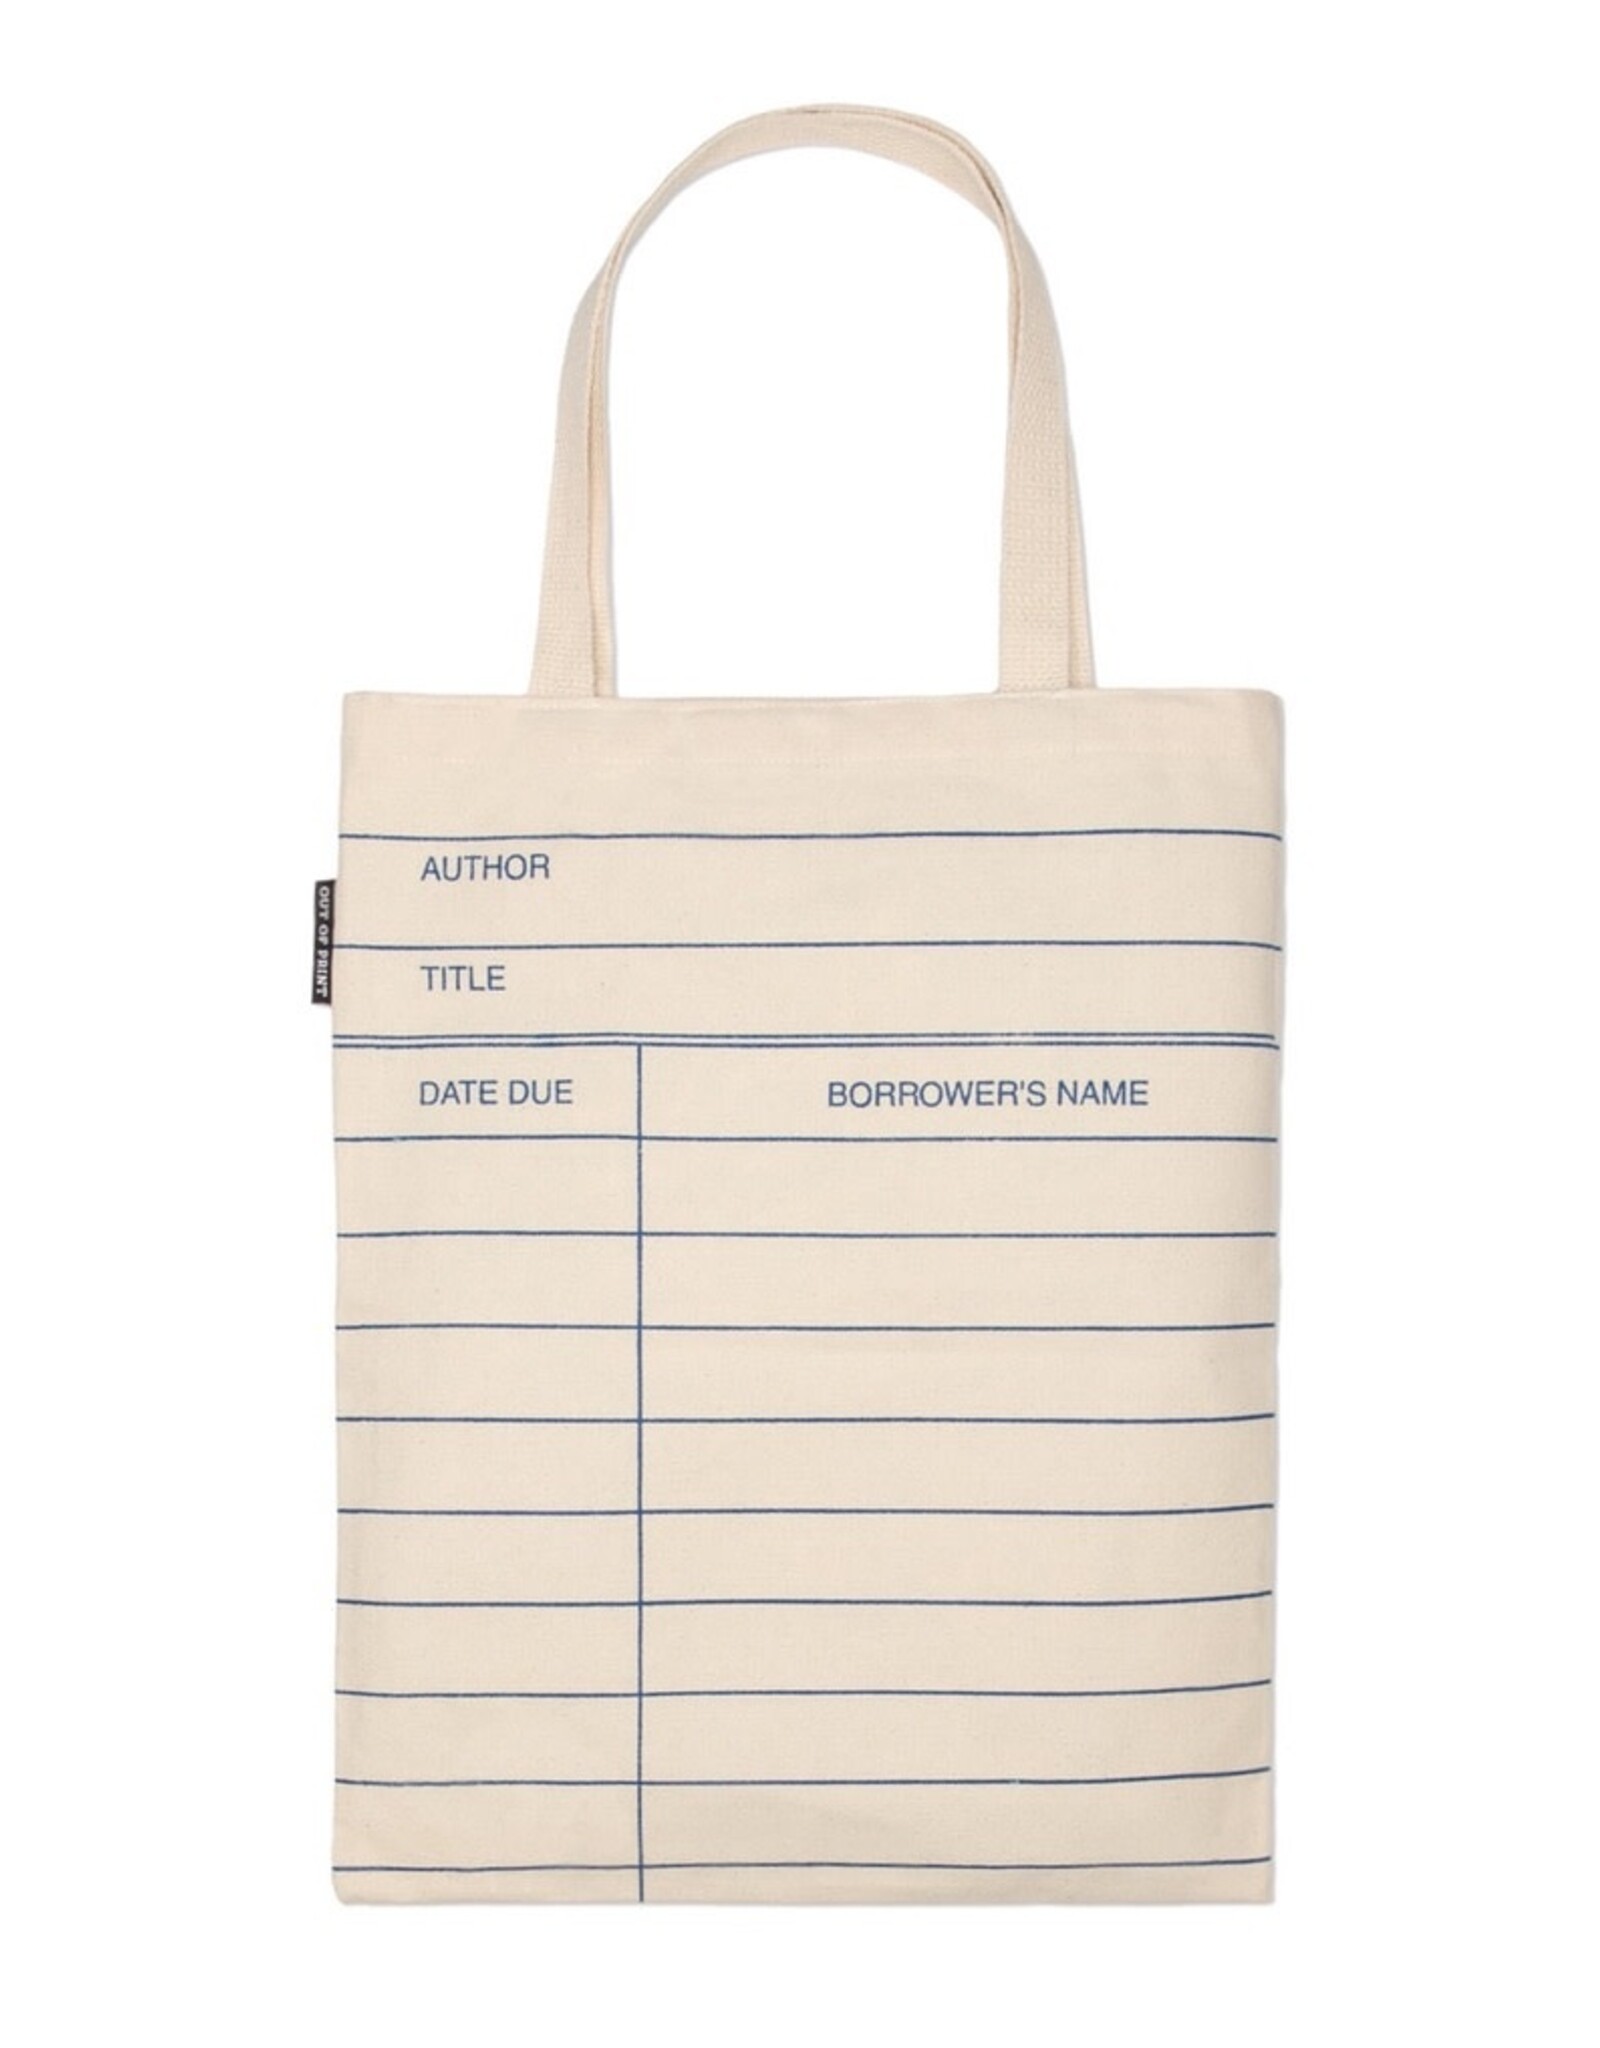 PSE - Out of Print - Tote Bag / Library Card, Natural